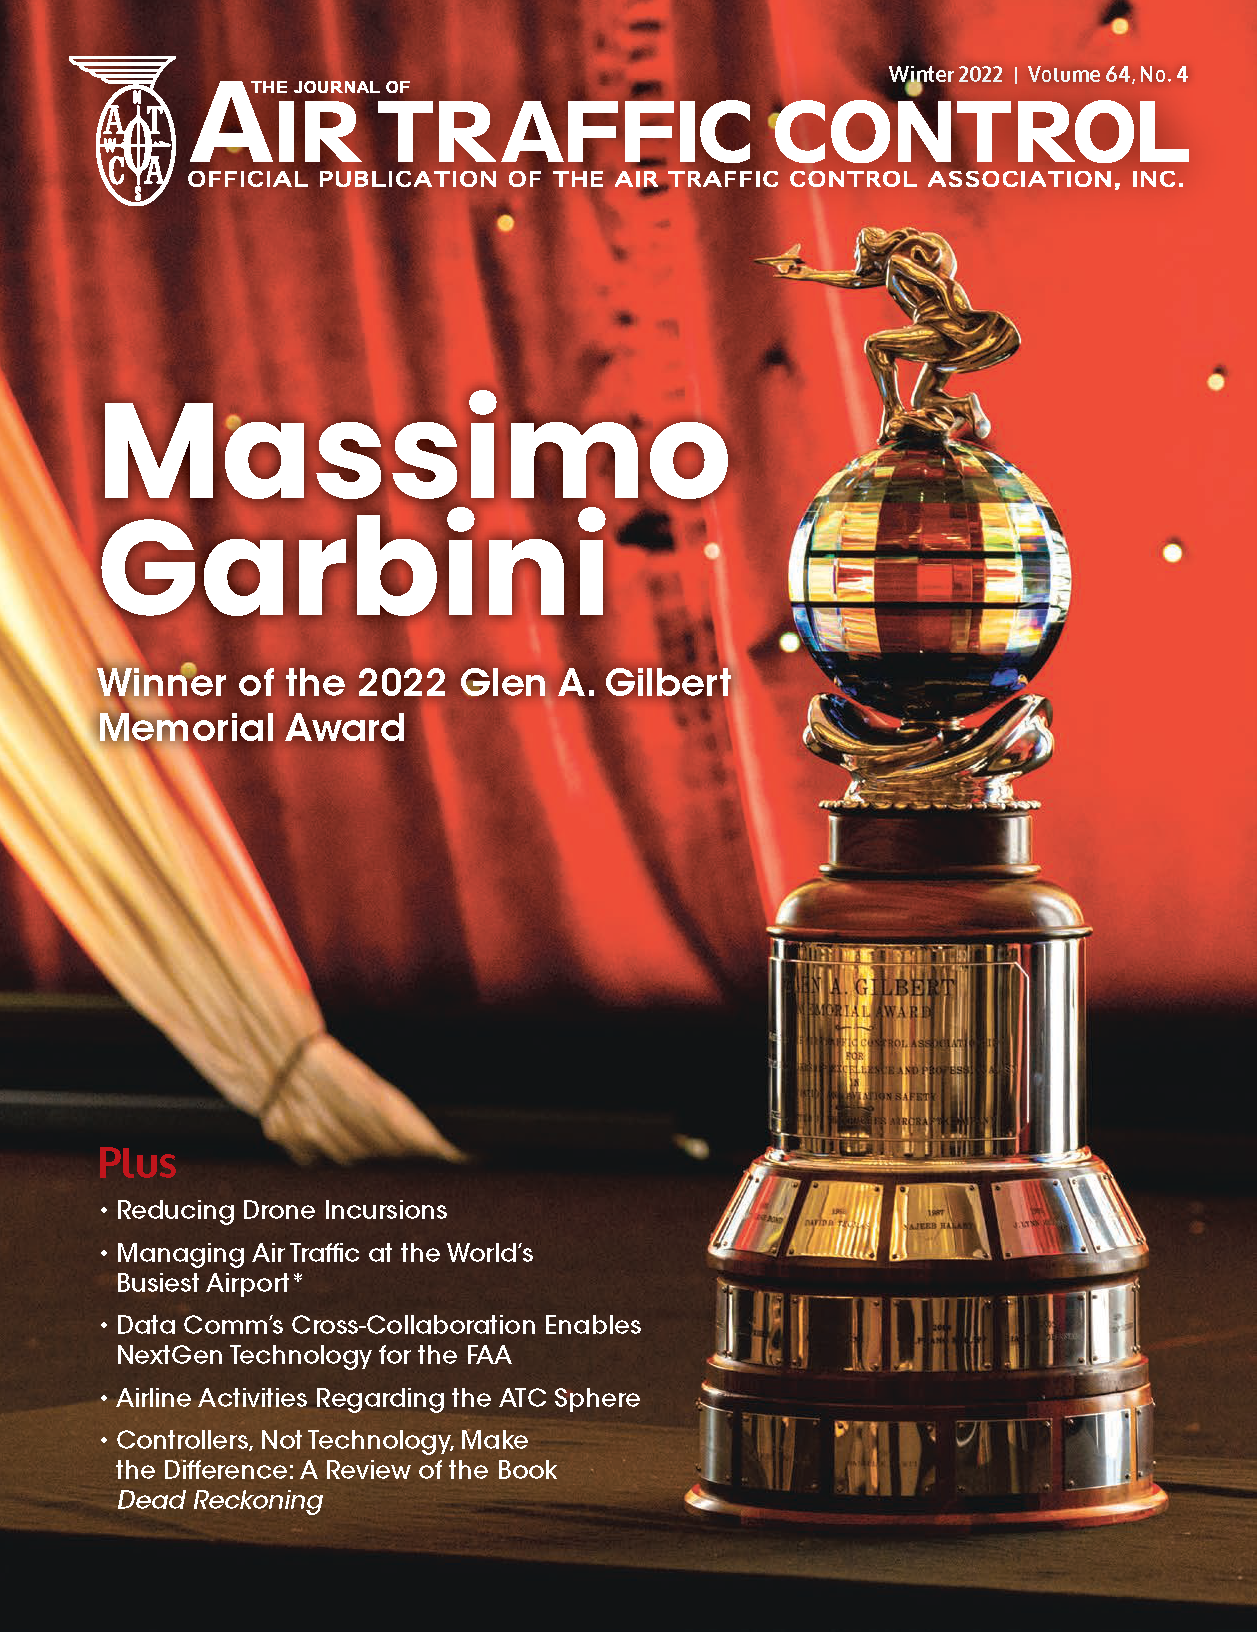 Journal of Air Traffic Control Winter 2022 issue image of trophy against red background.